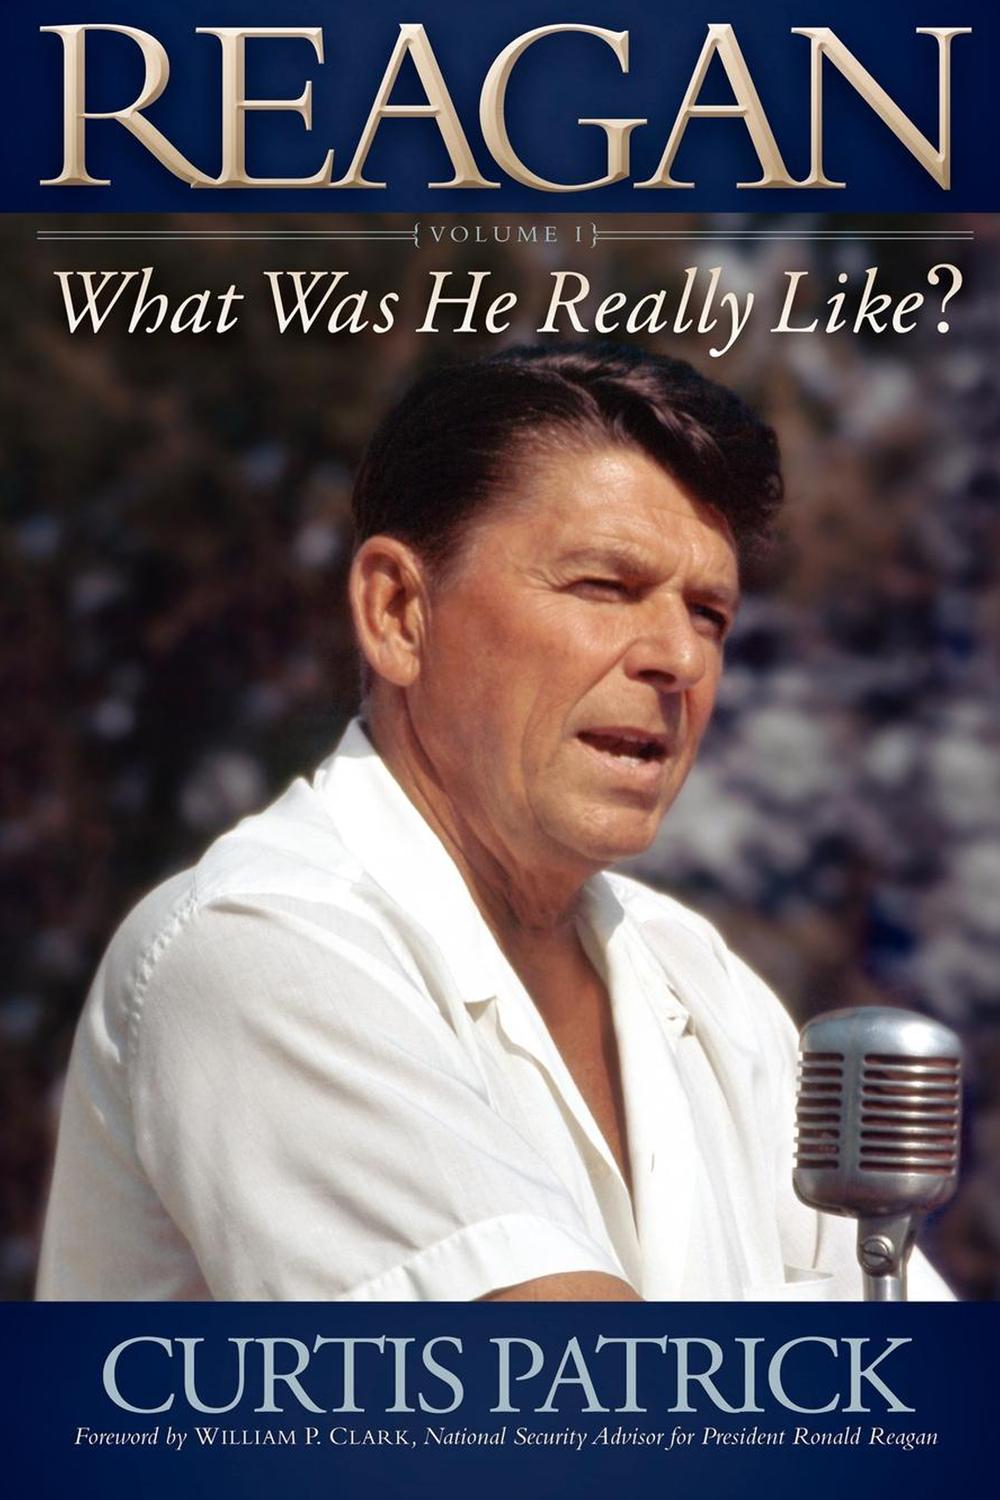 Reagan: What Was He Really Like? Volume I - Curtis Patrick